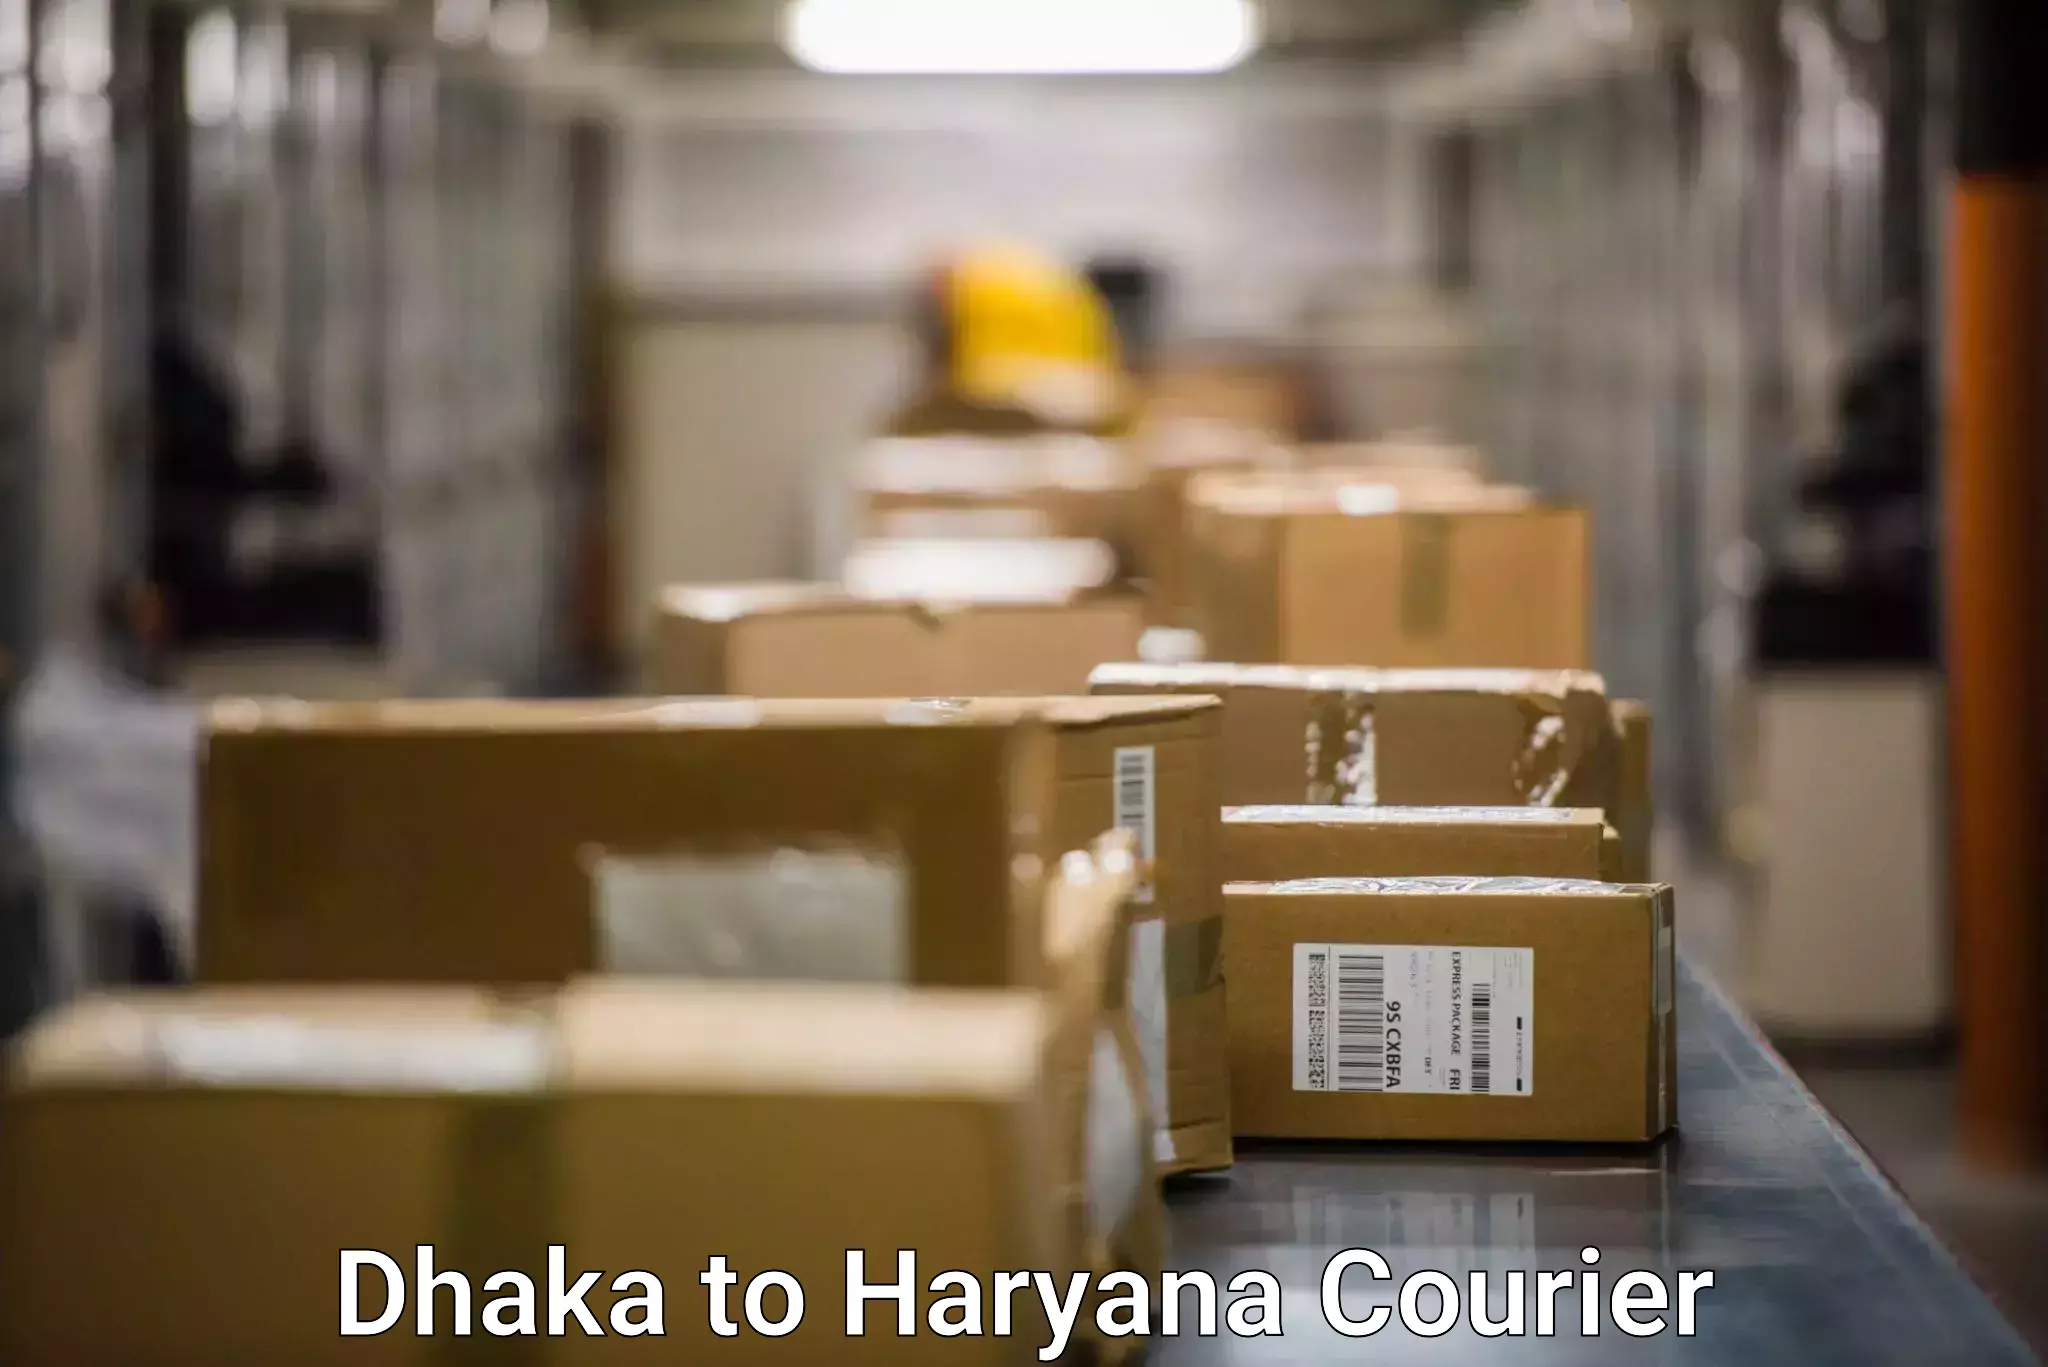 Cargo delivery service Dhaka to Chaudhary Charan Singh Haryana Agricultural University Hisar